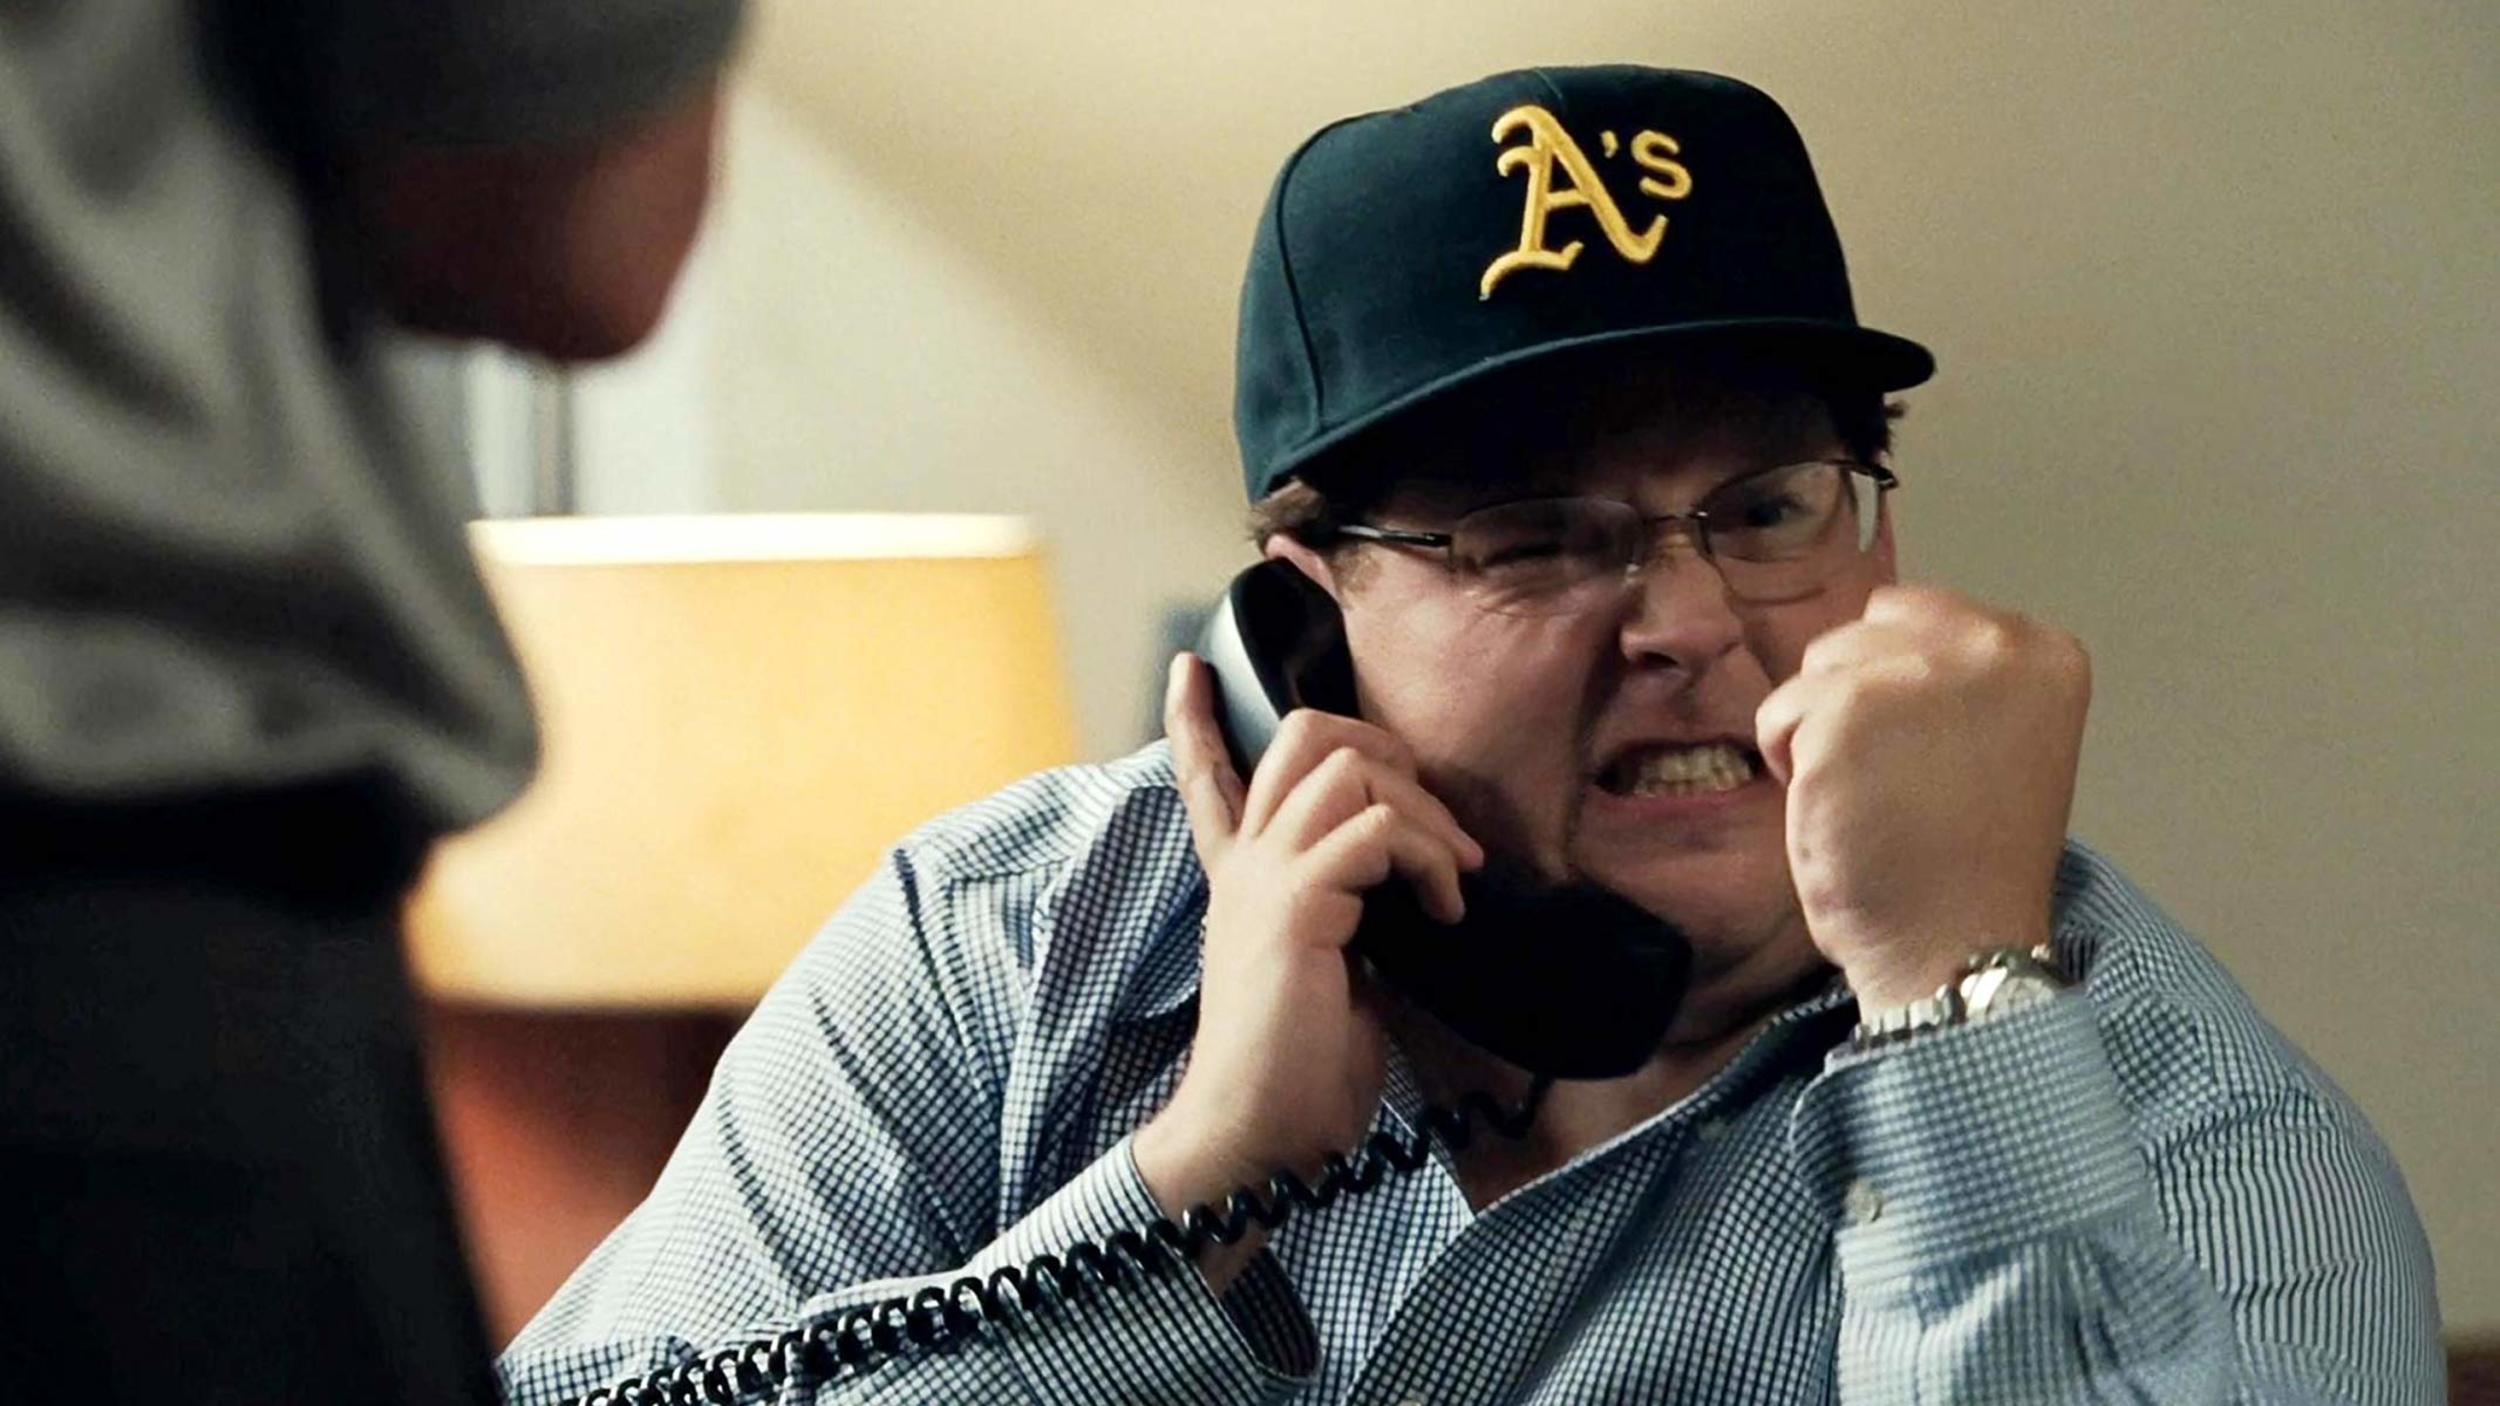 <p>Billy Beane used sabermetrics and analytics to turn the penny-pinching Oakland Athletics into a playoff team. Does that sound like it could make an interesting film? Well, surprise! “Moneyball” is really good! Brad Pitt is great as Beane, and Jonah Hill is good as the made-up character Peter Brand. It’s a fascinating behind-the-scenes look at a real sports team.</p><p><a href='https://www.msn.com/en-us/community/channel/vid-cj9pqbr0vn9in2b6ddcd8sfgpfq6x6utp44fssrv6mc2gtybw0us'>Follow us on MSN to see more of our exclusive entertainment content.</a></p>